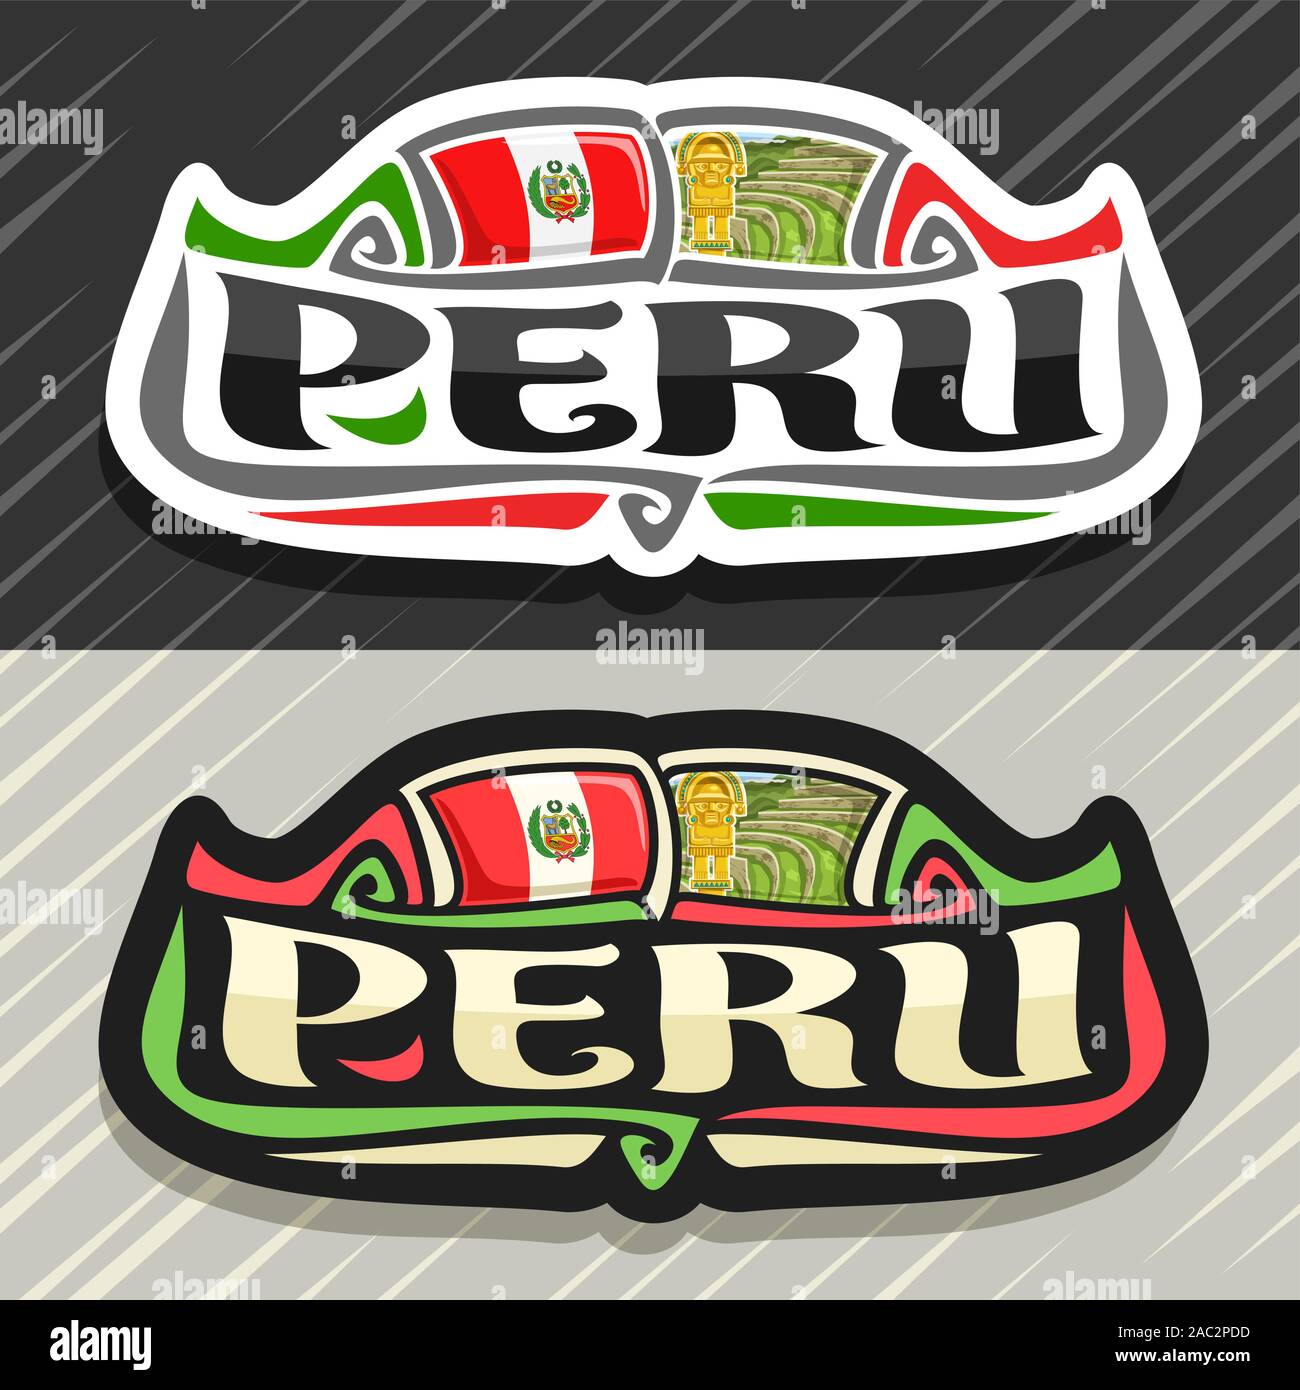 Vector logo for Peru country, fridge magnet with peruvian state flag, original brush typeface for word peru and national peruvian symbols - ancient in Stock Vector